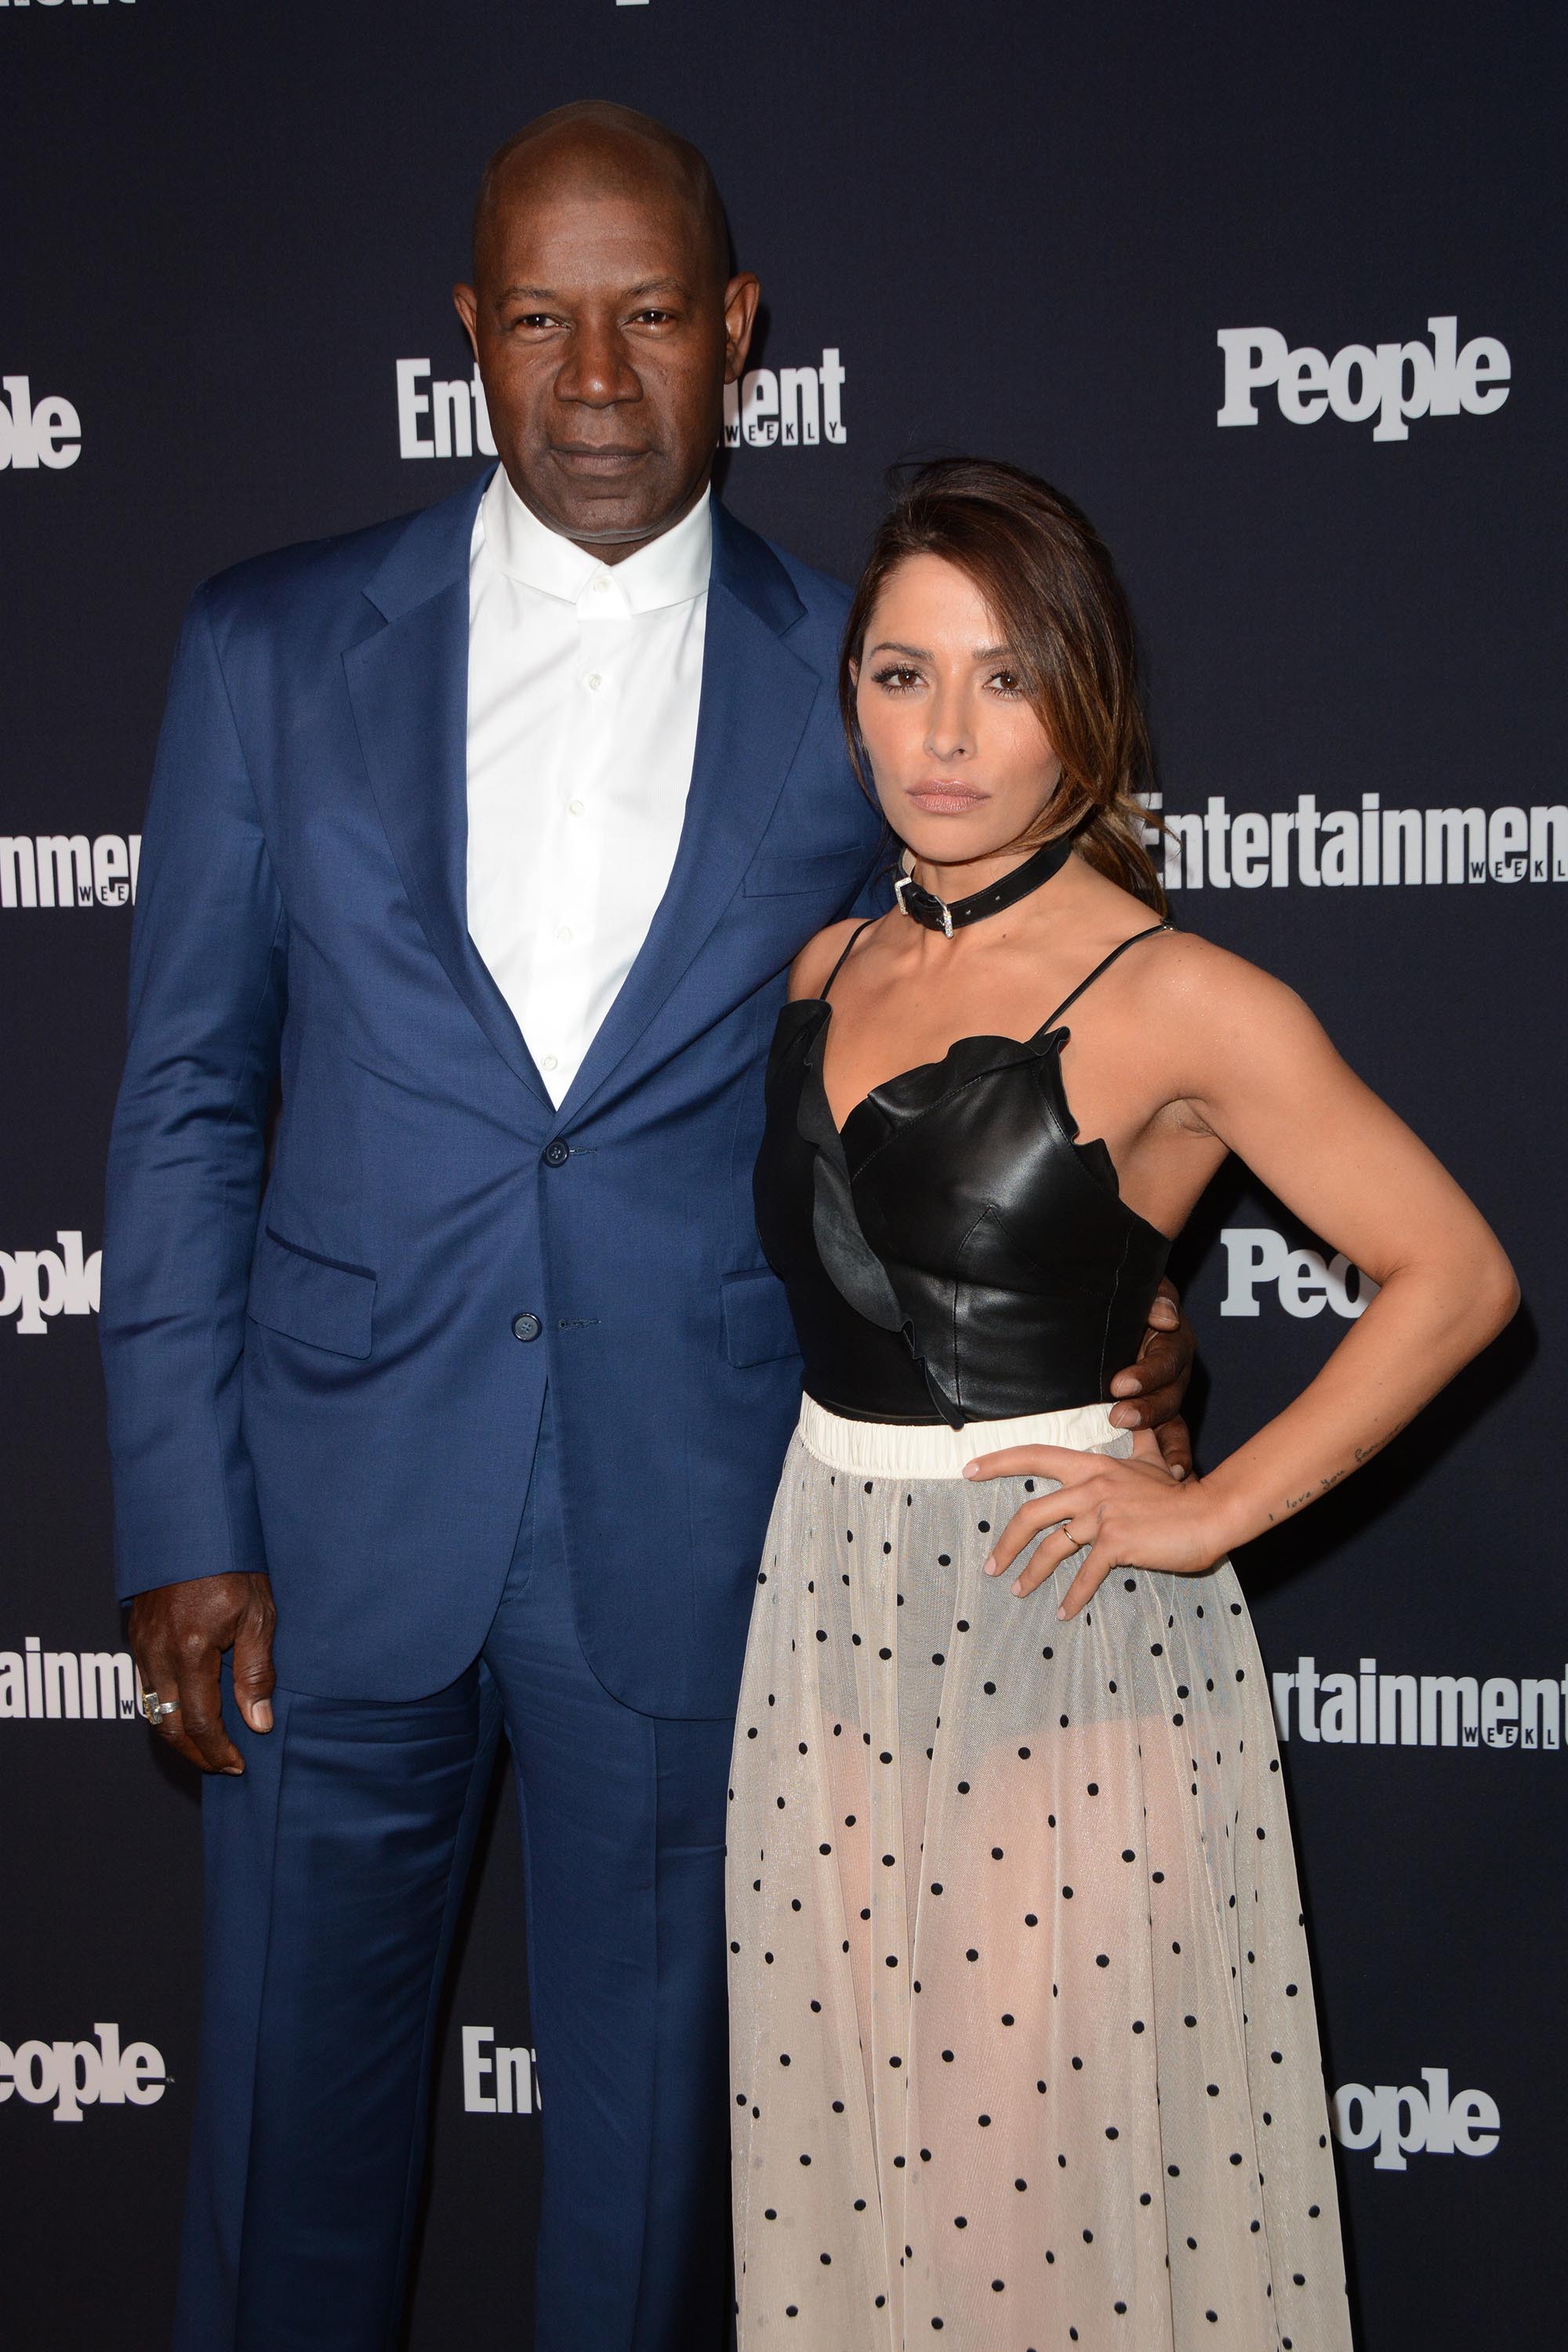 Sarah Shahi attends the Entertainment Weekly & PEOPLE Upfront Party